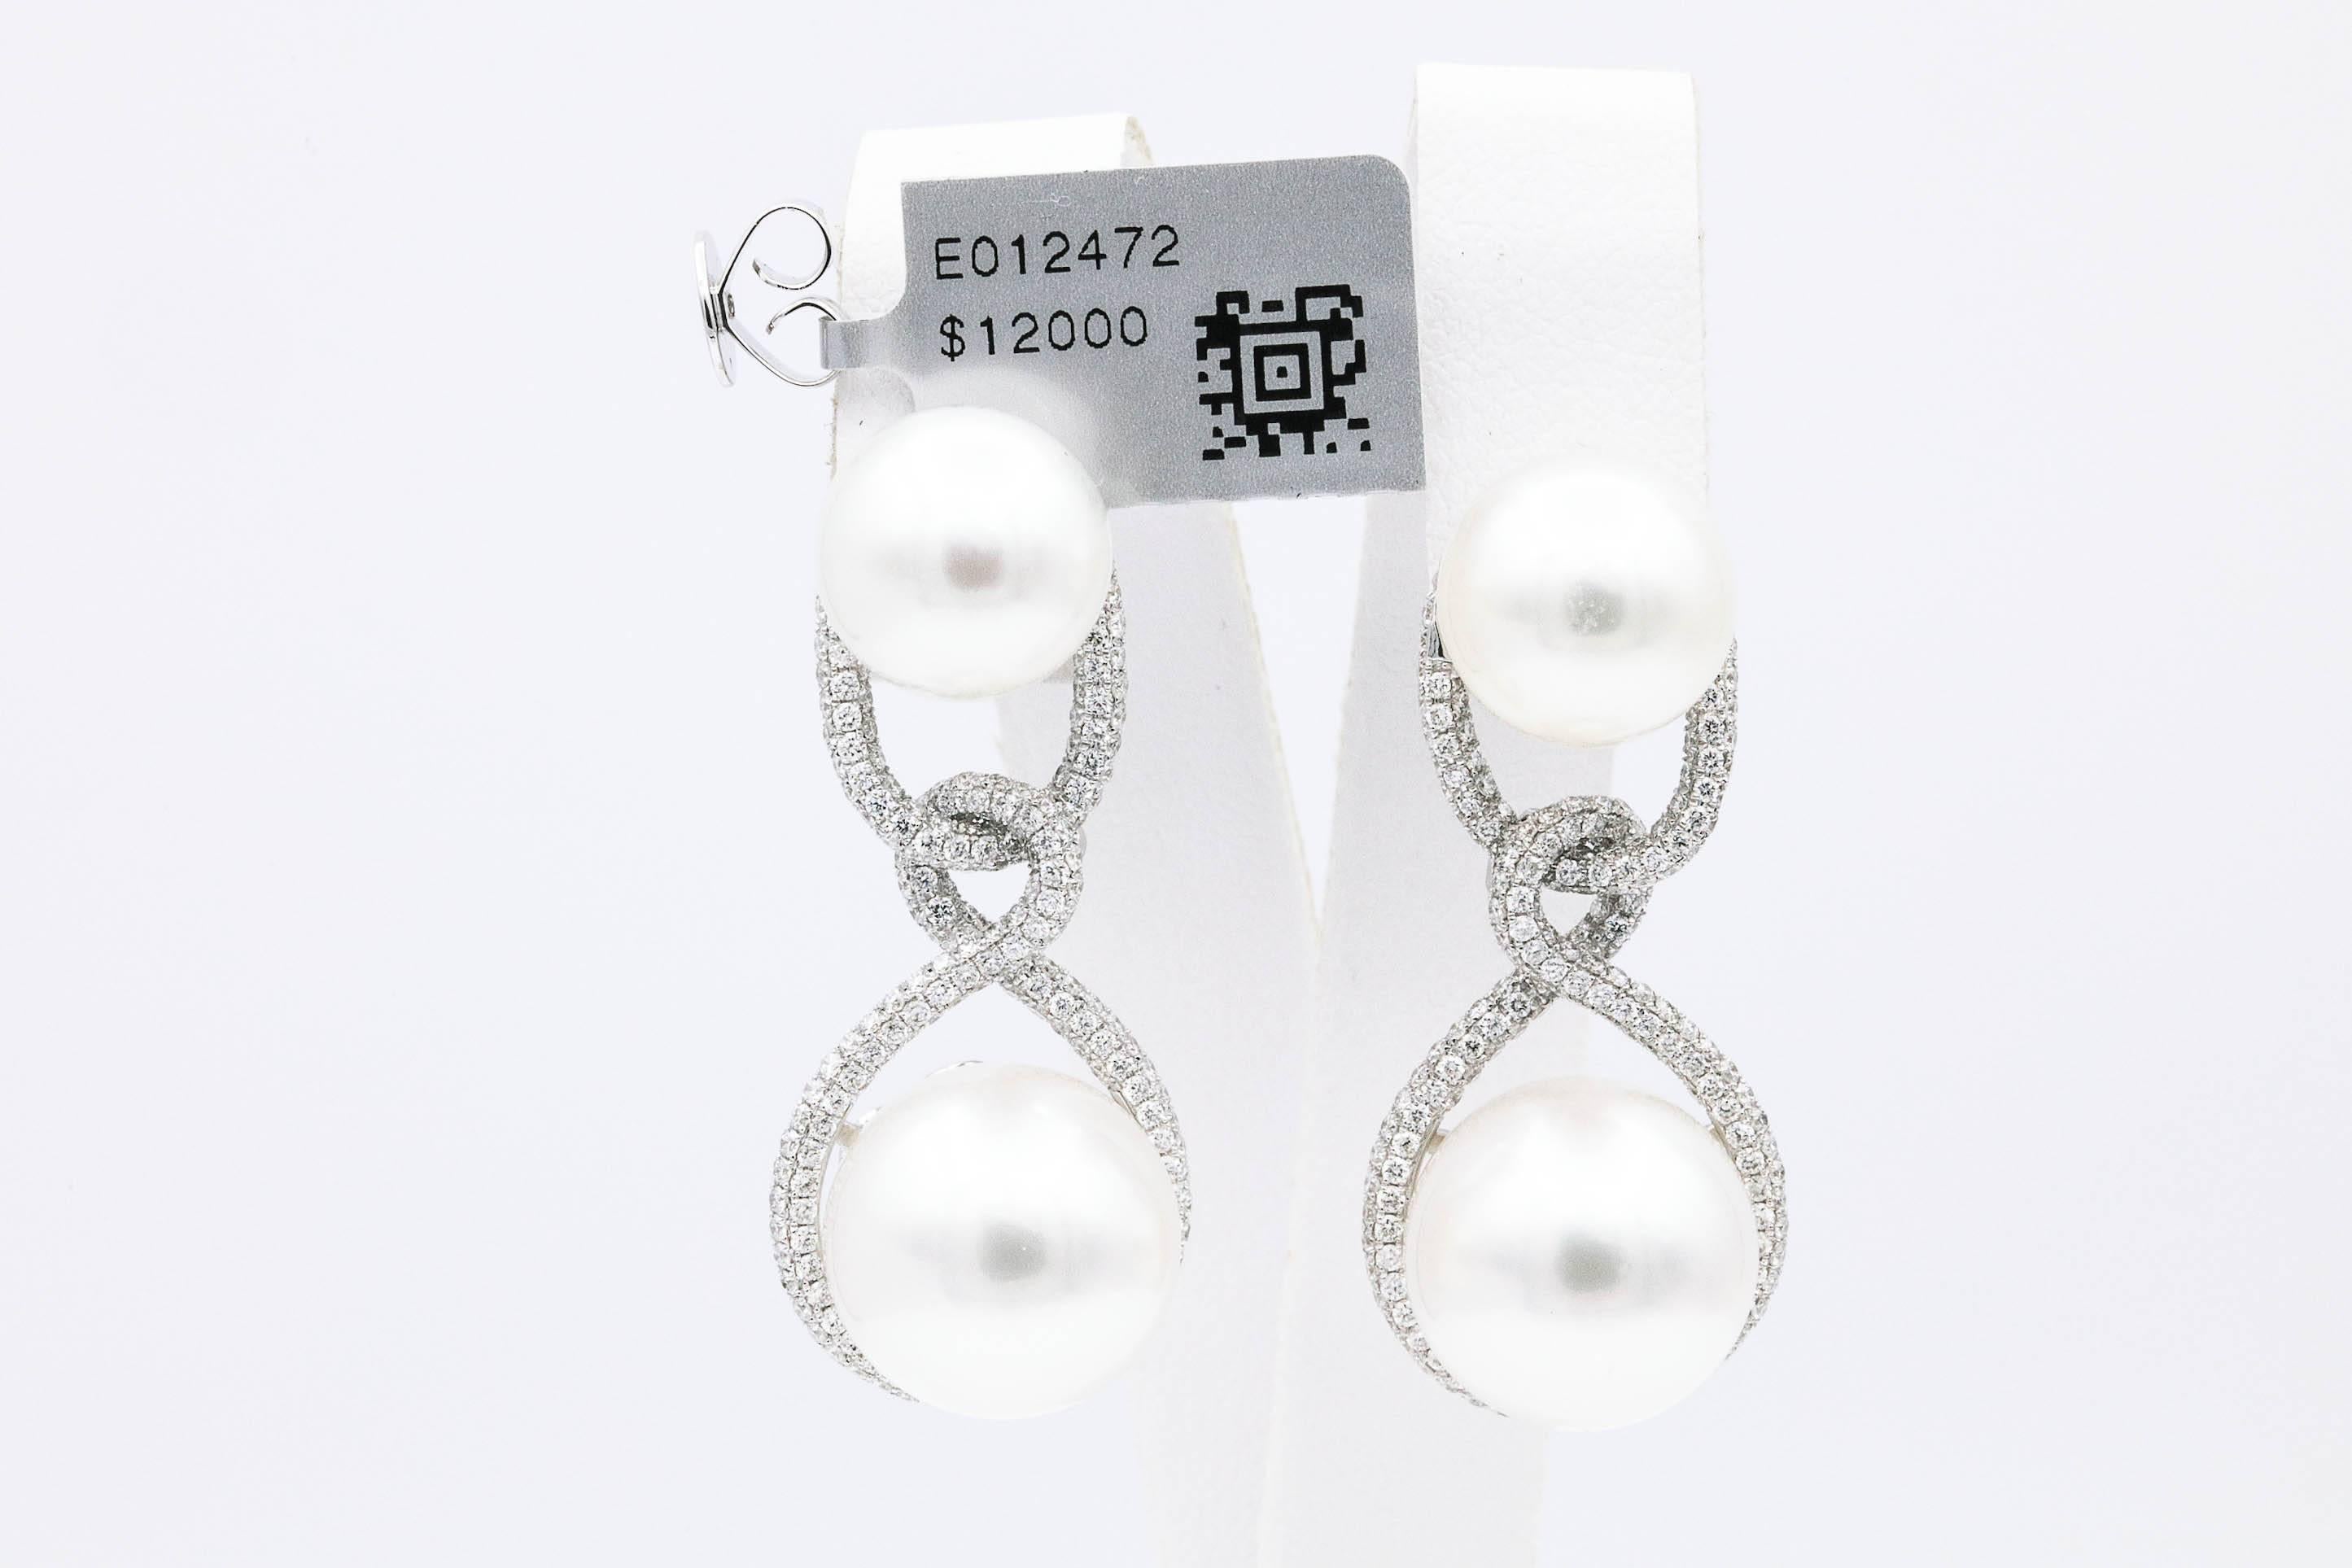 18K White Gold earrings featuring four South Sea Pearls measuring 11-13 MM flanked with numerous diamonds weighing 1.90 Carats. Color G-H Clarity SI